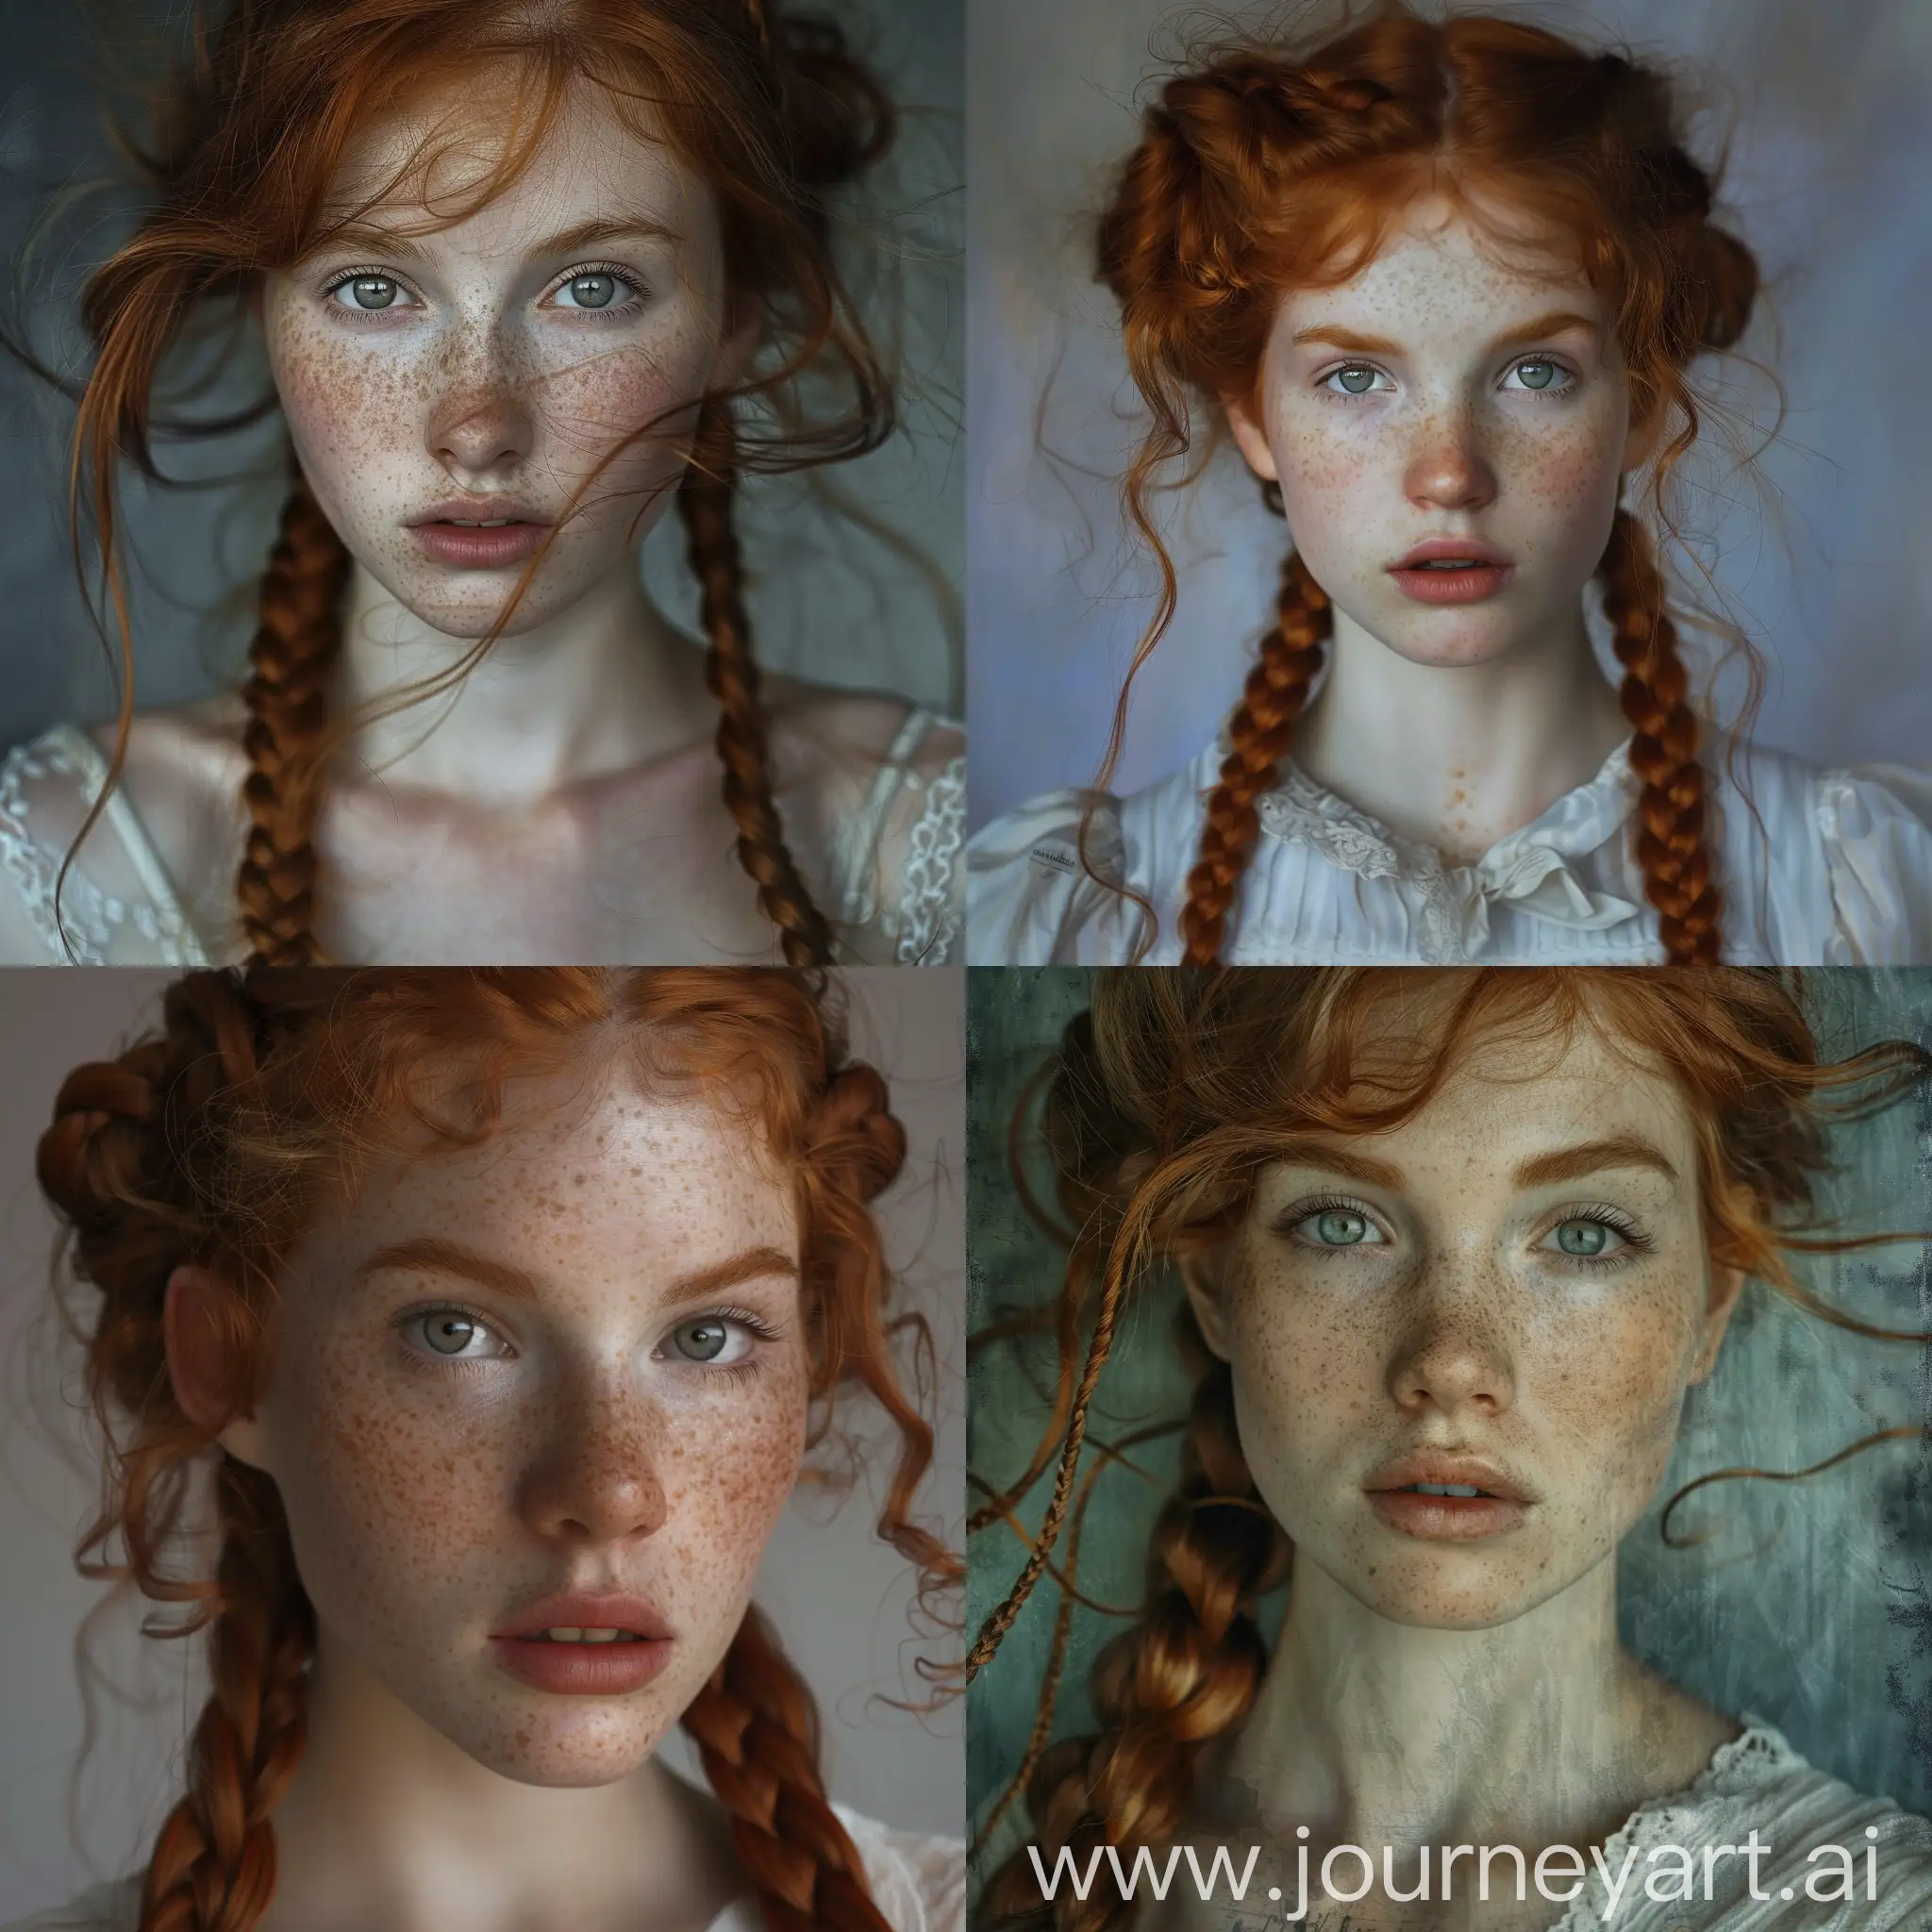 18 year old red haired woman with braids and she has pale skin, captivating portrait